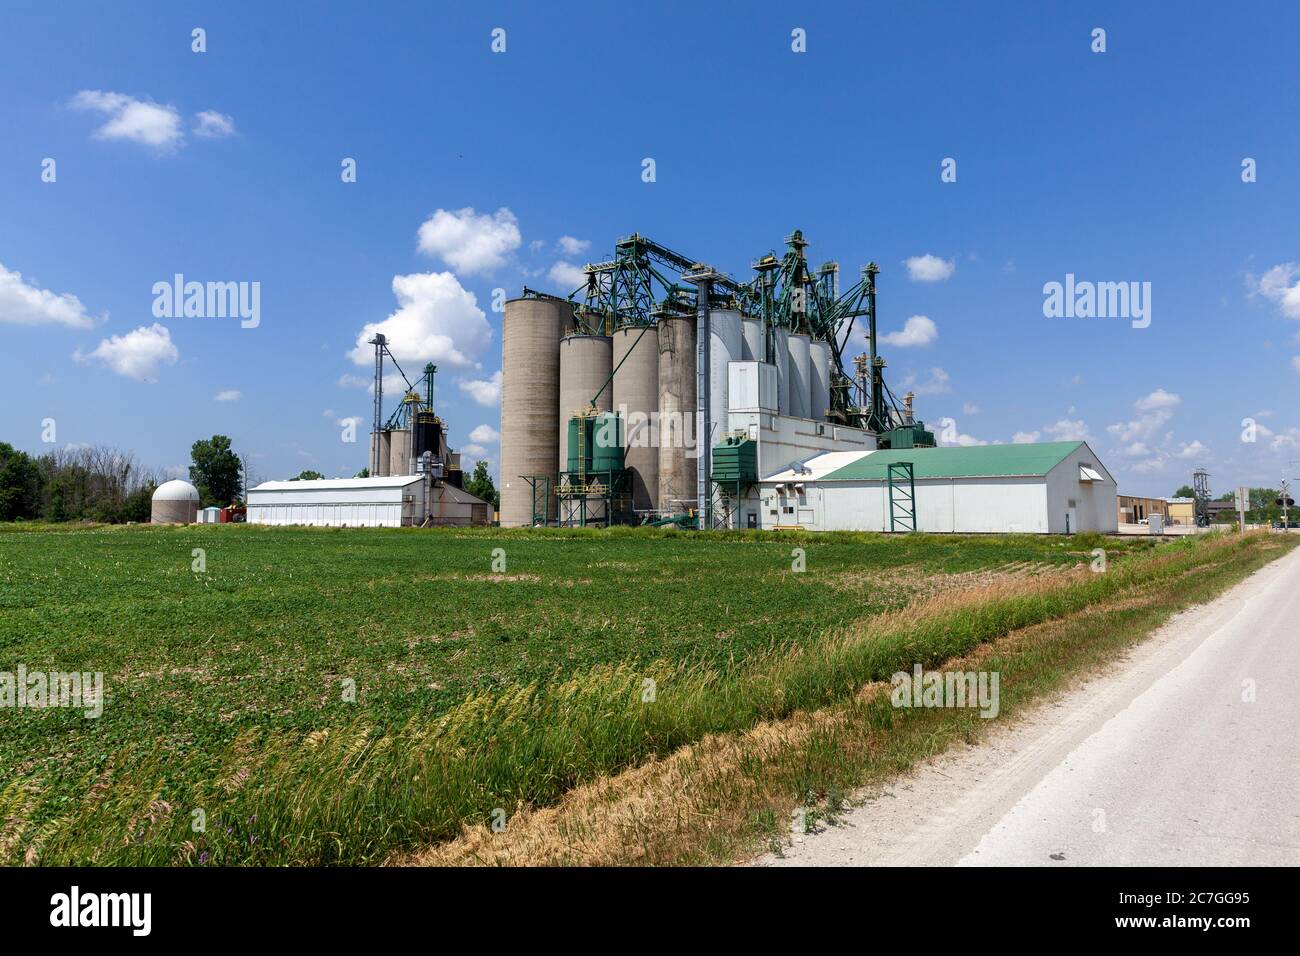 Thompsons Grain Elevator In Mitchell Ontario Canada Agricultral Products Storage And Distribution Stockfoto